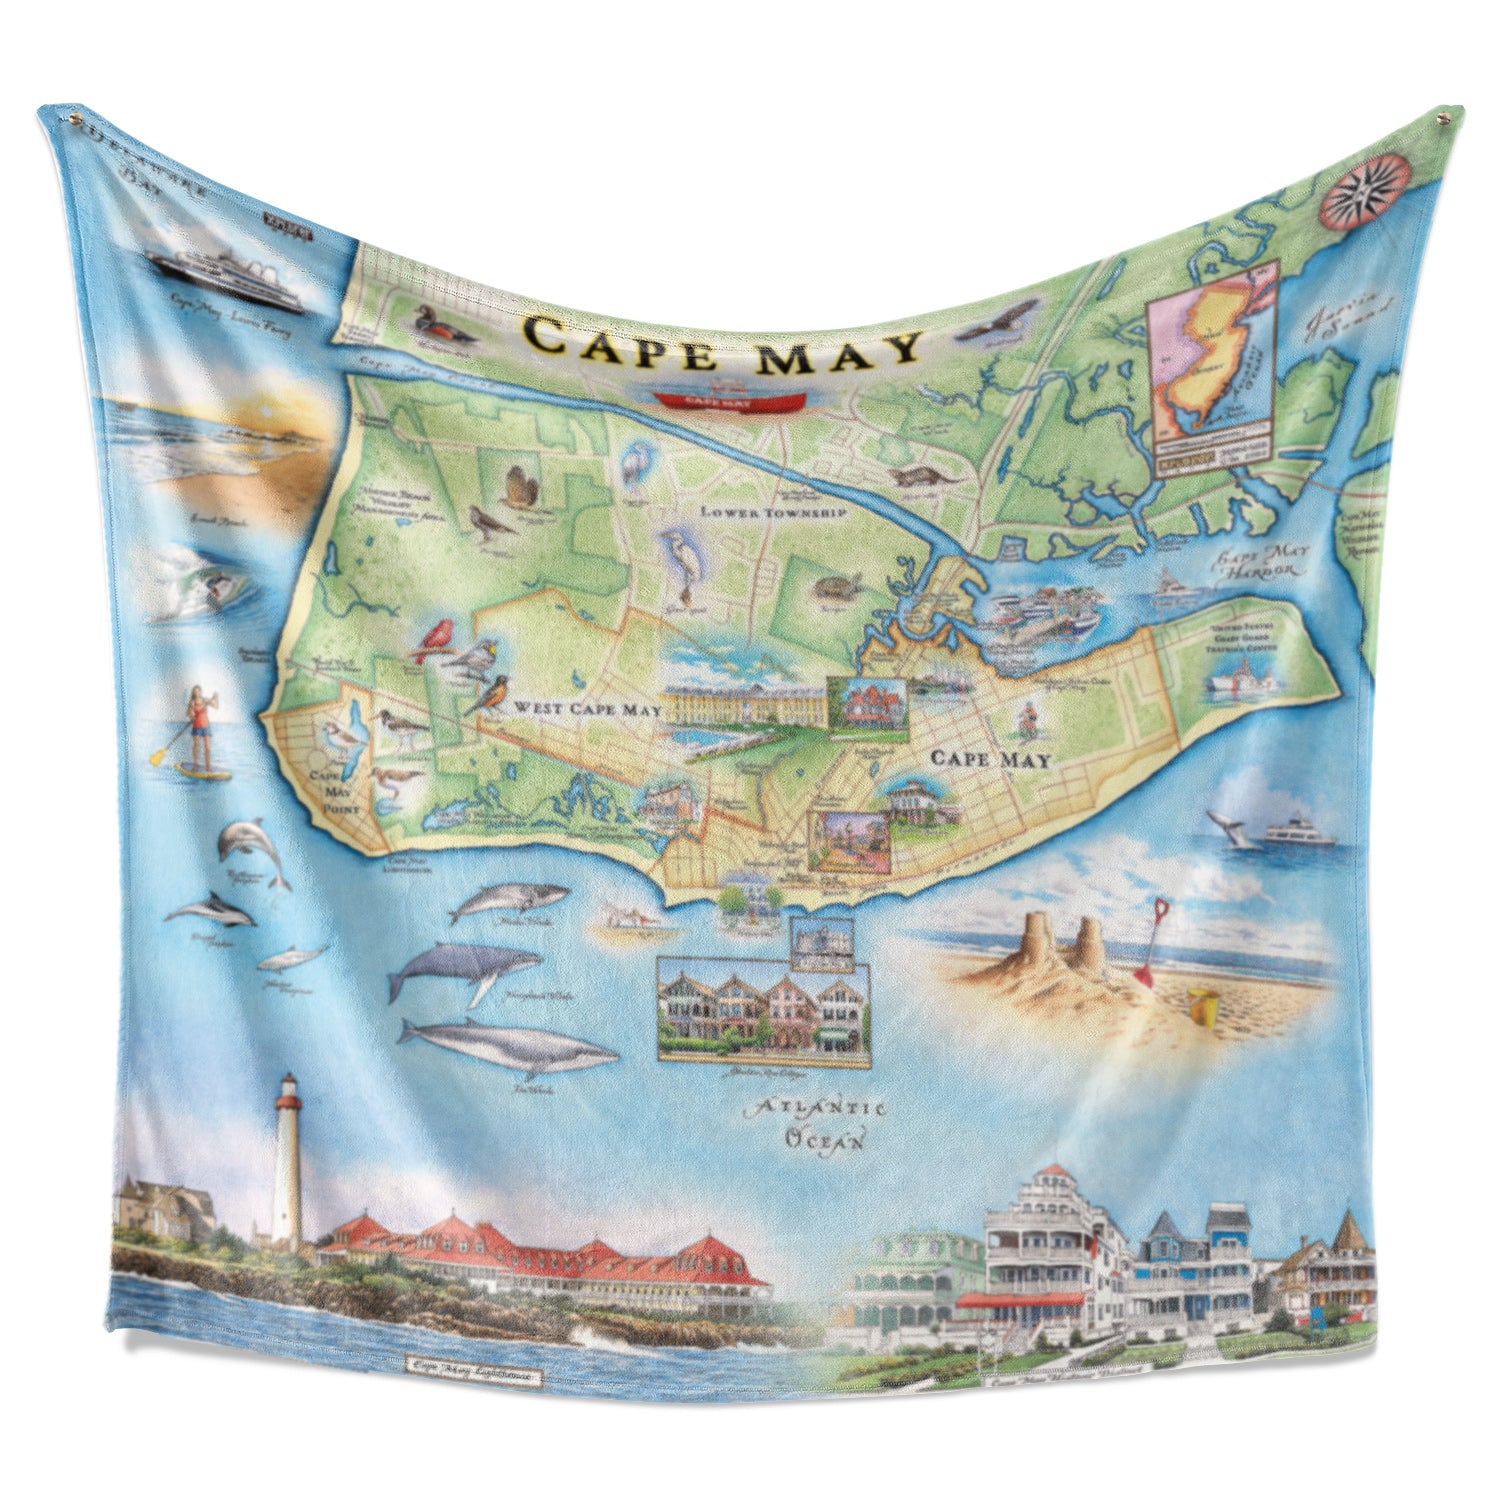 Hanging fleece blanket with a map of Cape May in New Jersey. The map features lighthouse, historic district, and flora and fauna. Measures 50